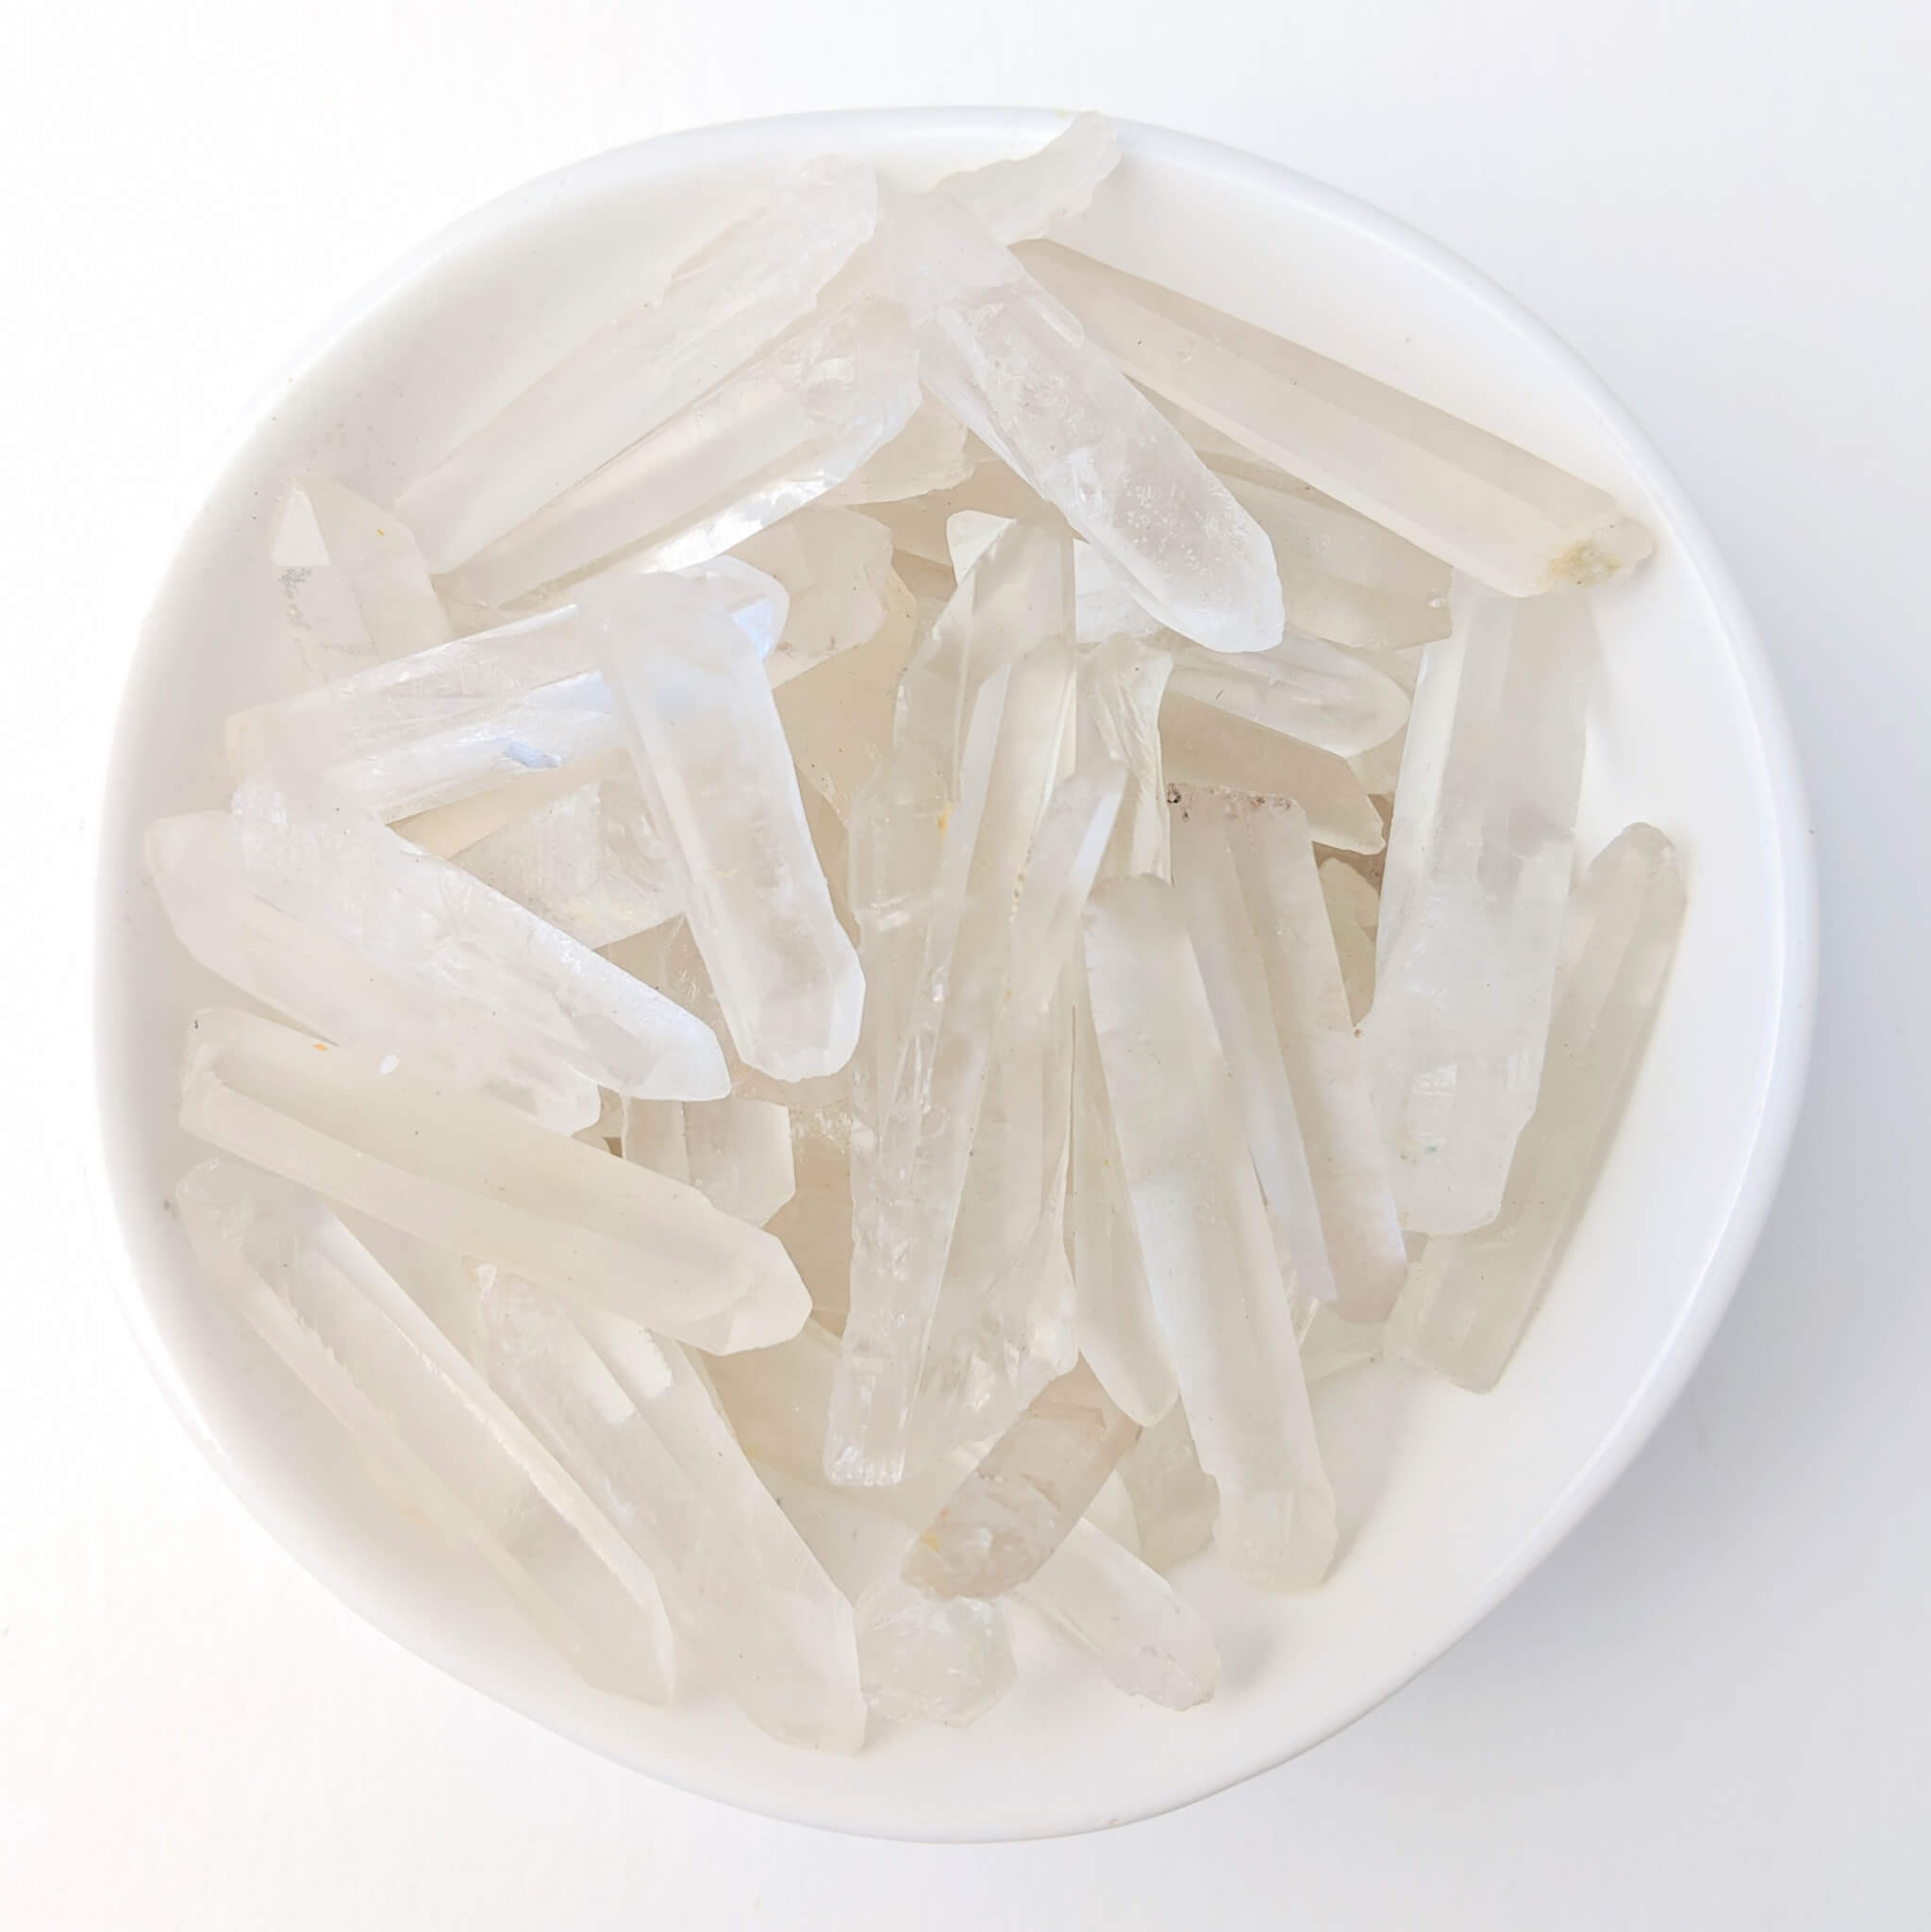 Clear Quartz Crystal Points in a White Bowl Top View